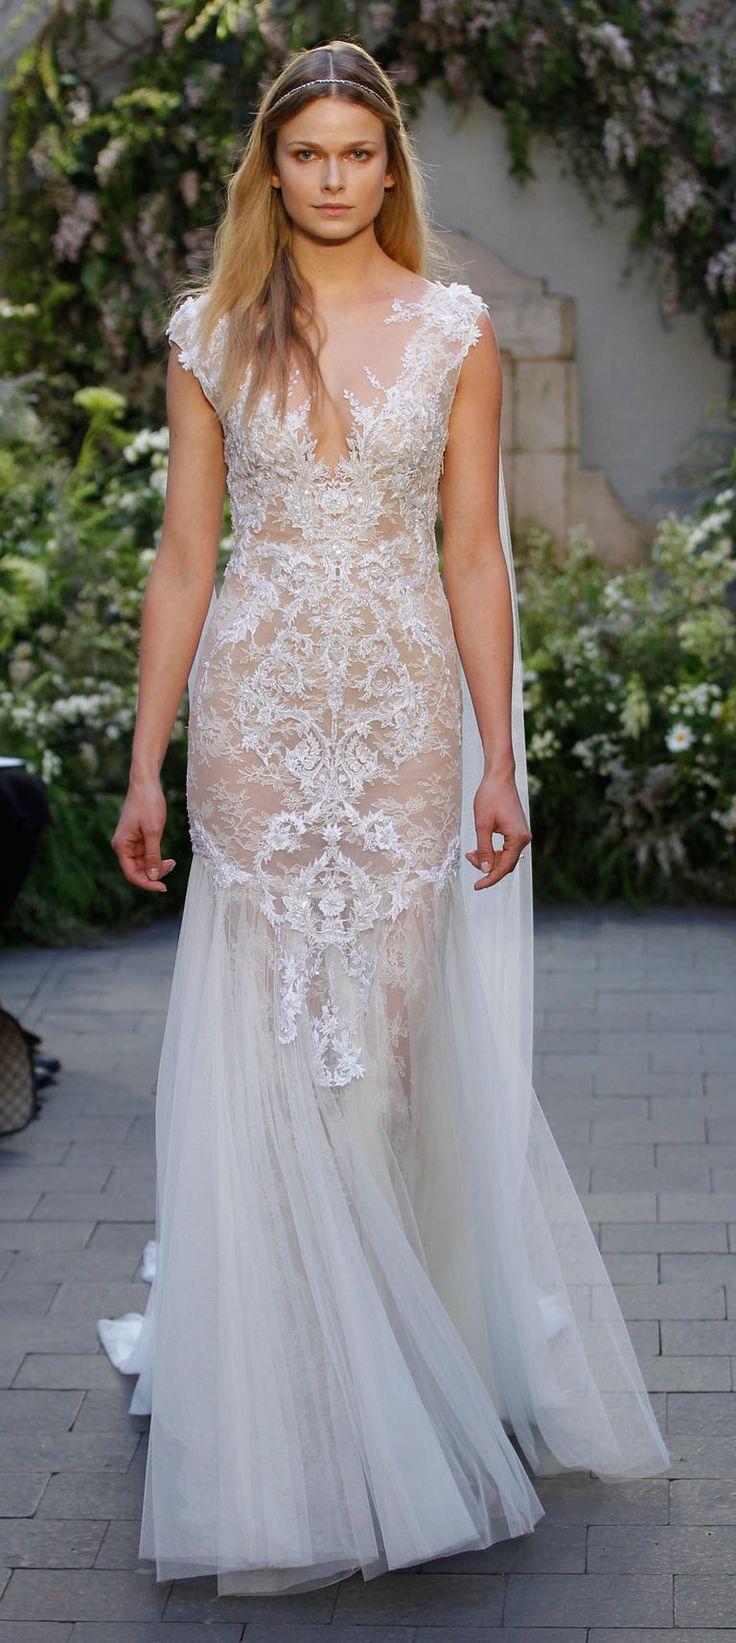 Hochzeit - Monique Lhuillier Stuns With Lingerie-Inspired Wedding Dresses And Pops Of Pastels